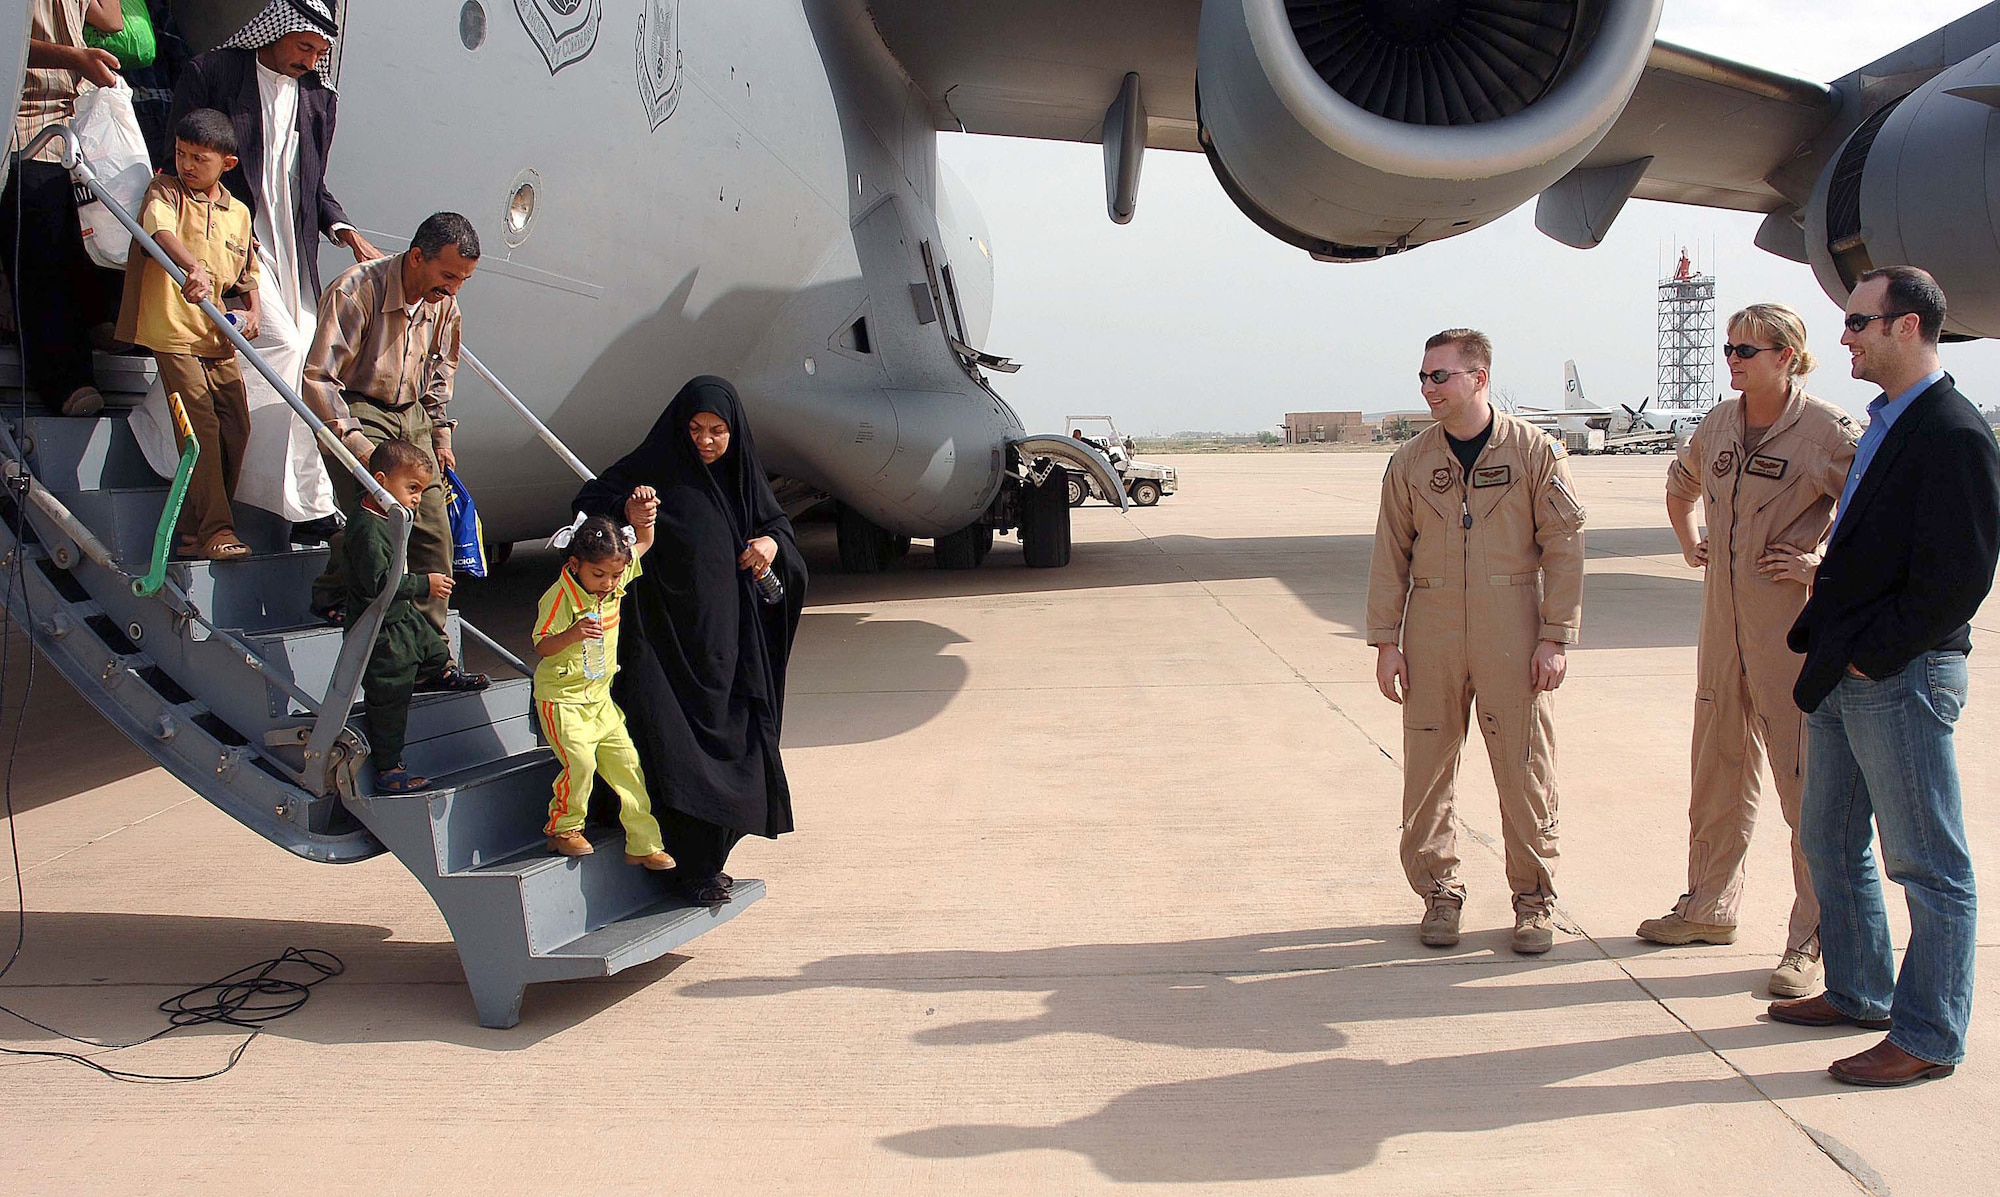 Iraqi children and their escorts leave an Air Force C-17 Globemaster III at Baghdad International Airport, Iraq, on Saturday, April 29, 2006, as Chris Anderson of Operation Smile and two crewmembers watch. Operation Smile provides corrective surgery for cleft palates and cleft lips. The program provided surgery in Amman, Jordan, to more than 100 Iraqi children. They were flown back to Iraq on the C-17. Mr. Anderson is an Operation Smile staff member based in the Middle East. (U.S. Air Force photo/Master Sgt. Will Ackerman)